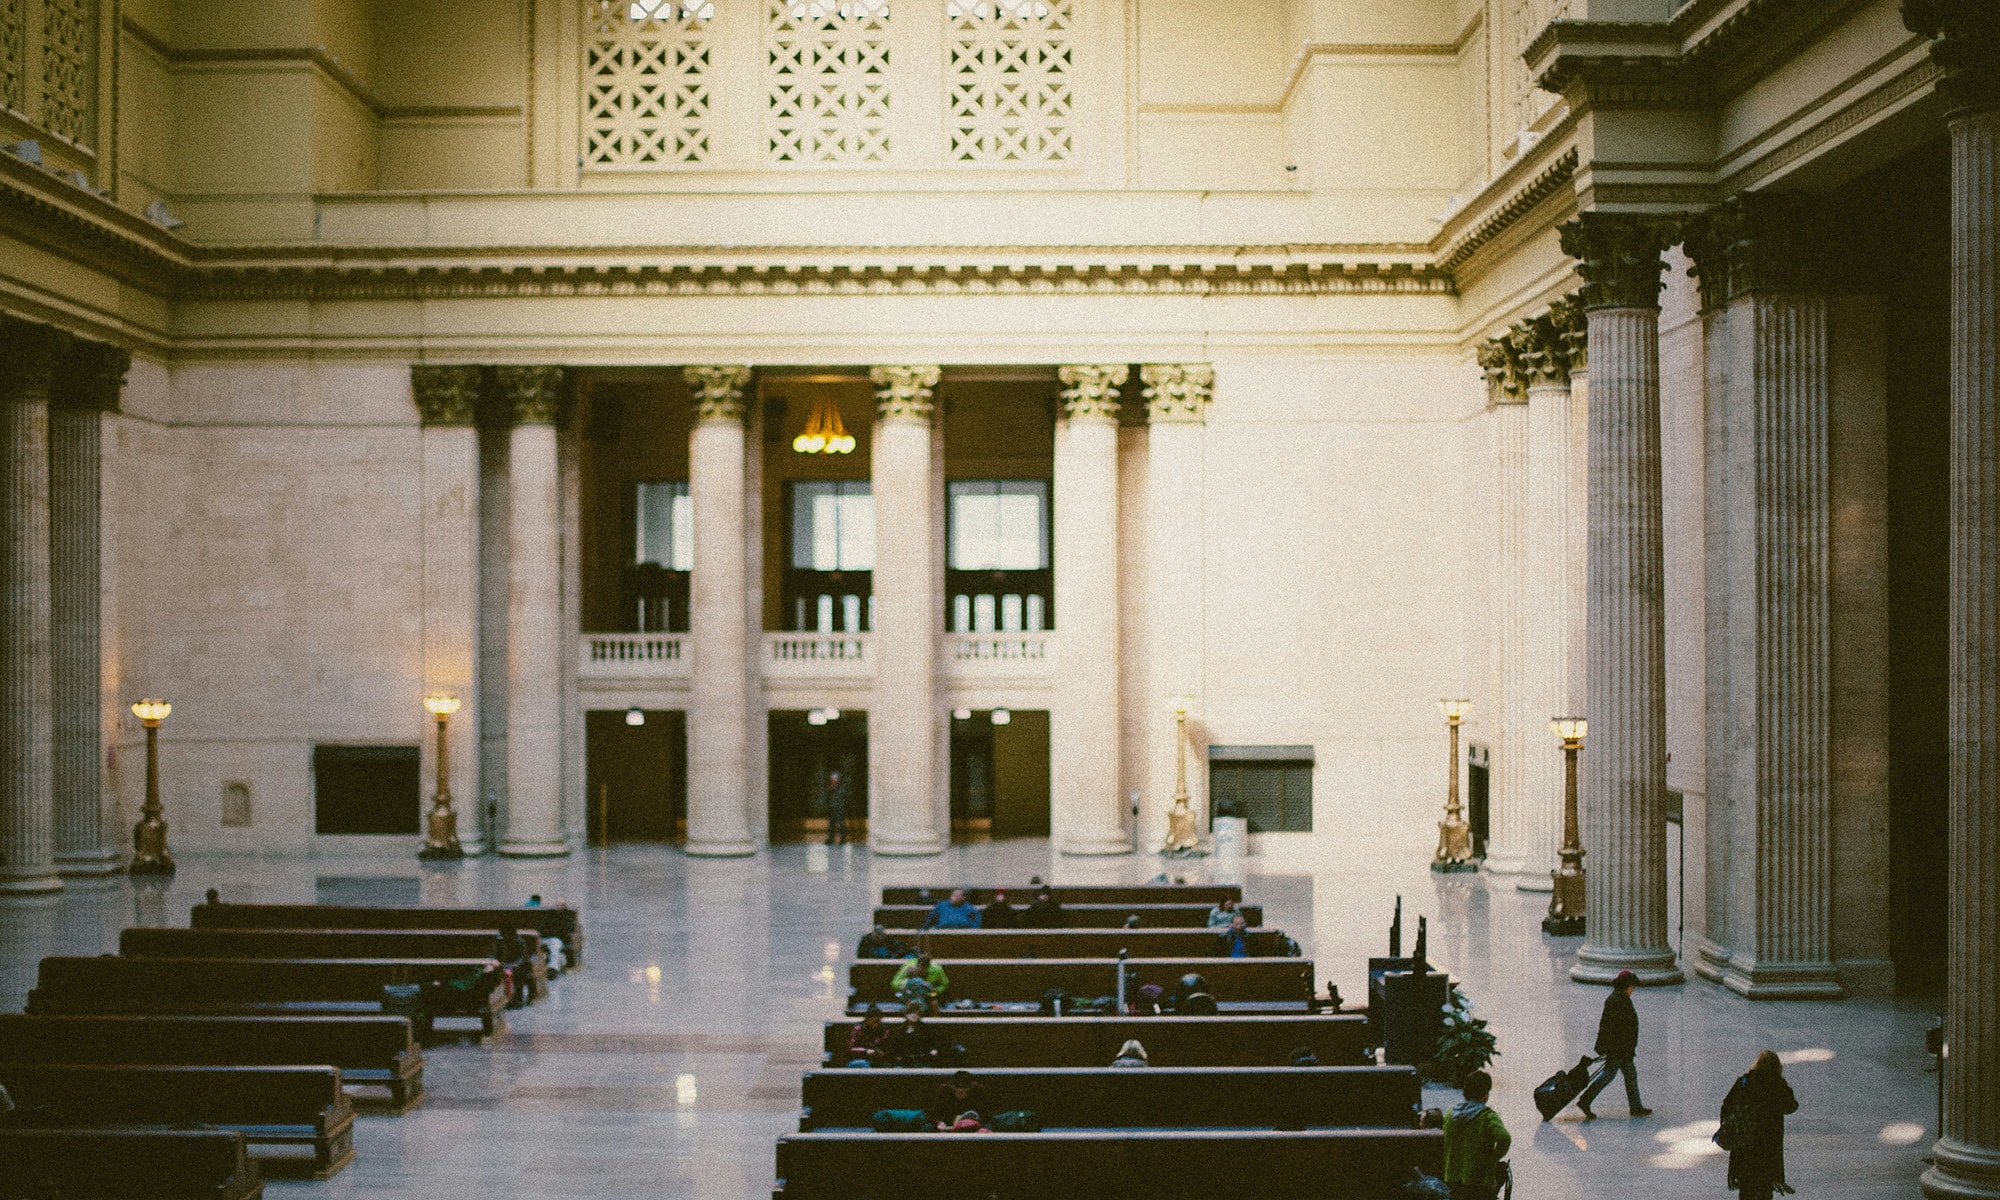 The interior of Amtrak's Union Station in Chicago.